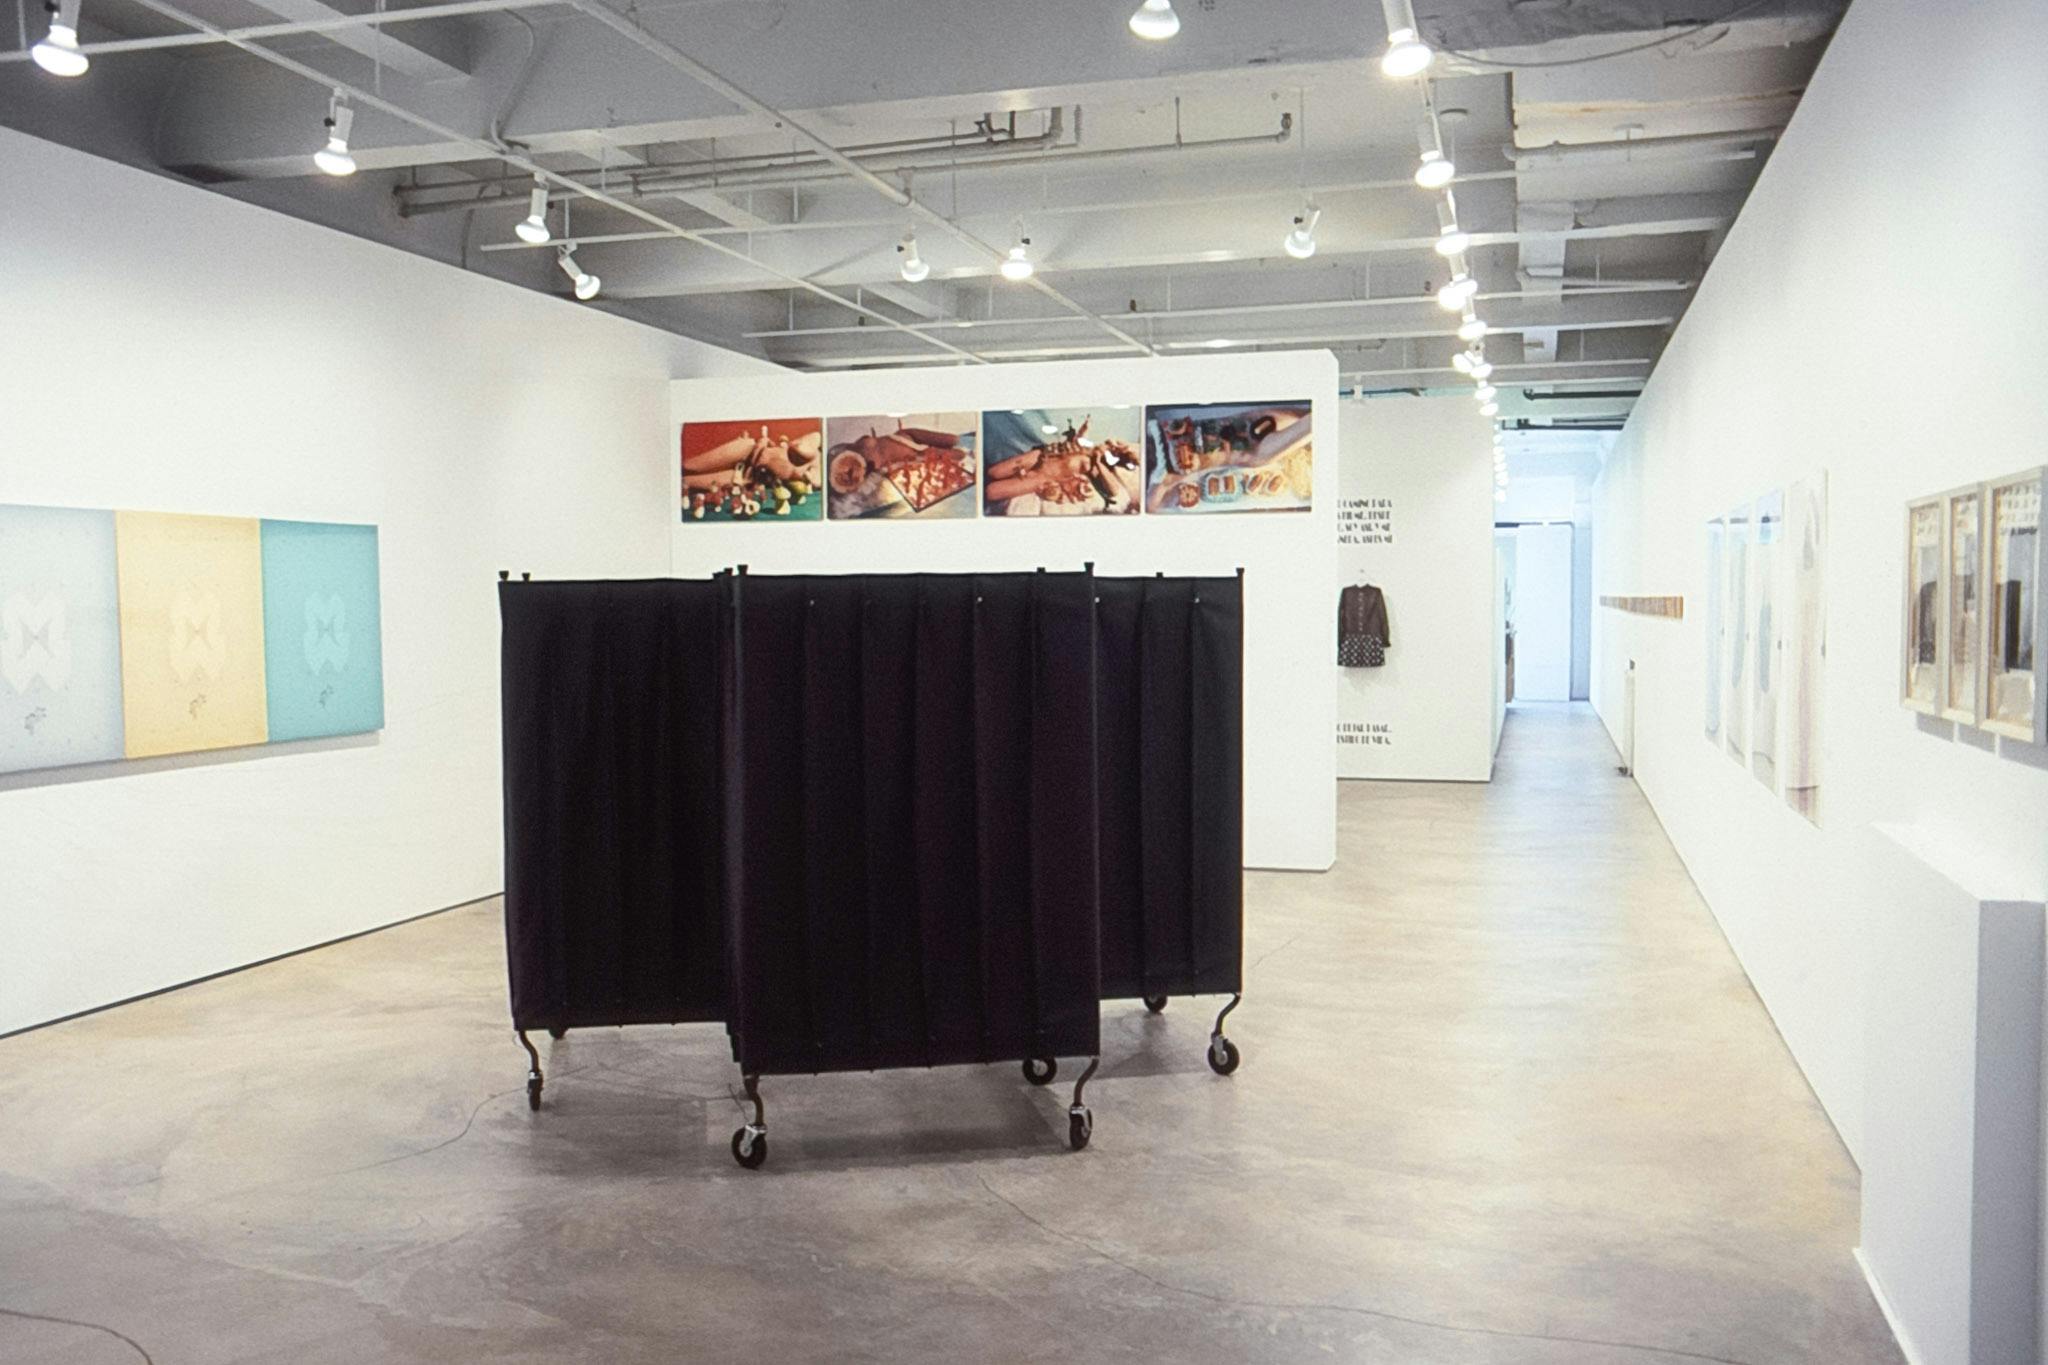 Various artworks are installed in the gallery. A pop-up changing room is placed in the middle of the floor, and a series of four photographs of a headless mannequin is mounted on a wall.